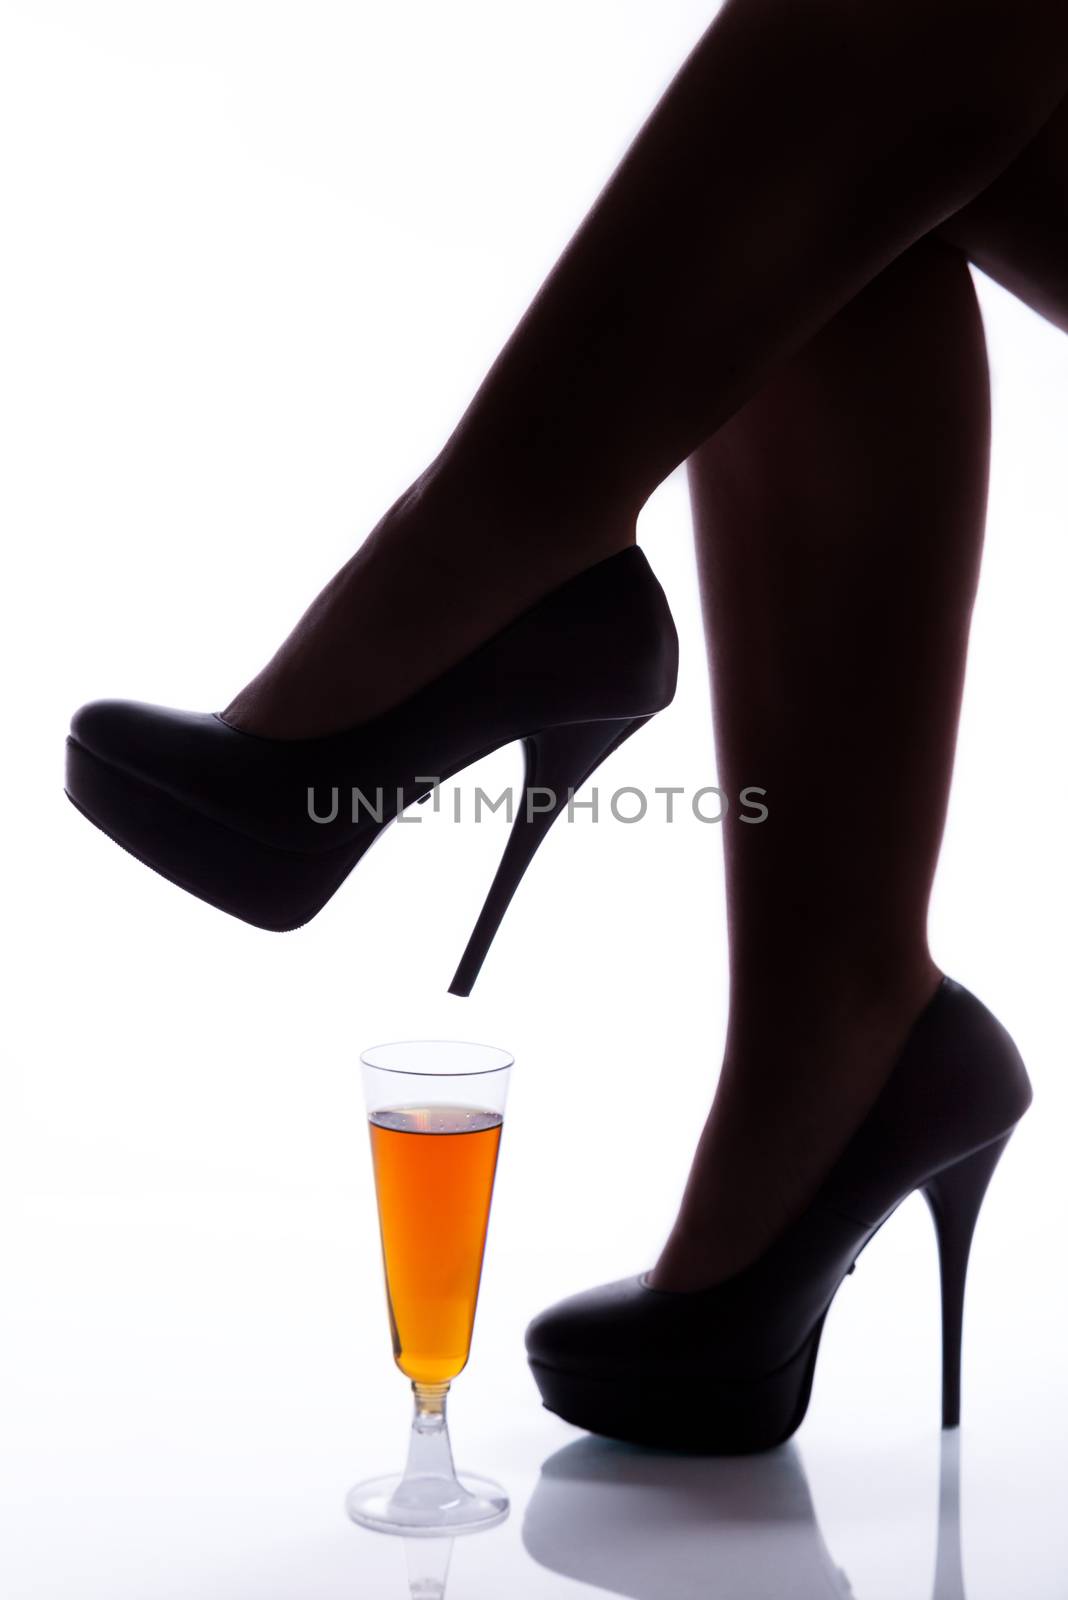 Legs of a woman in high heels over a wine glass